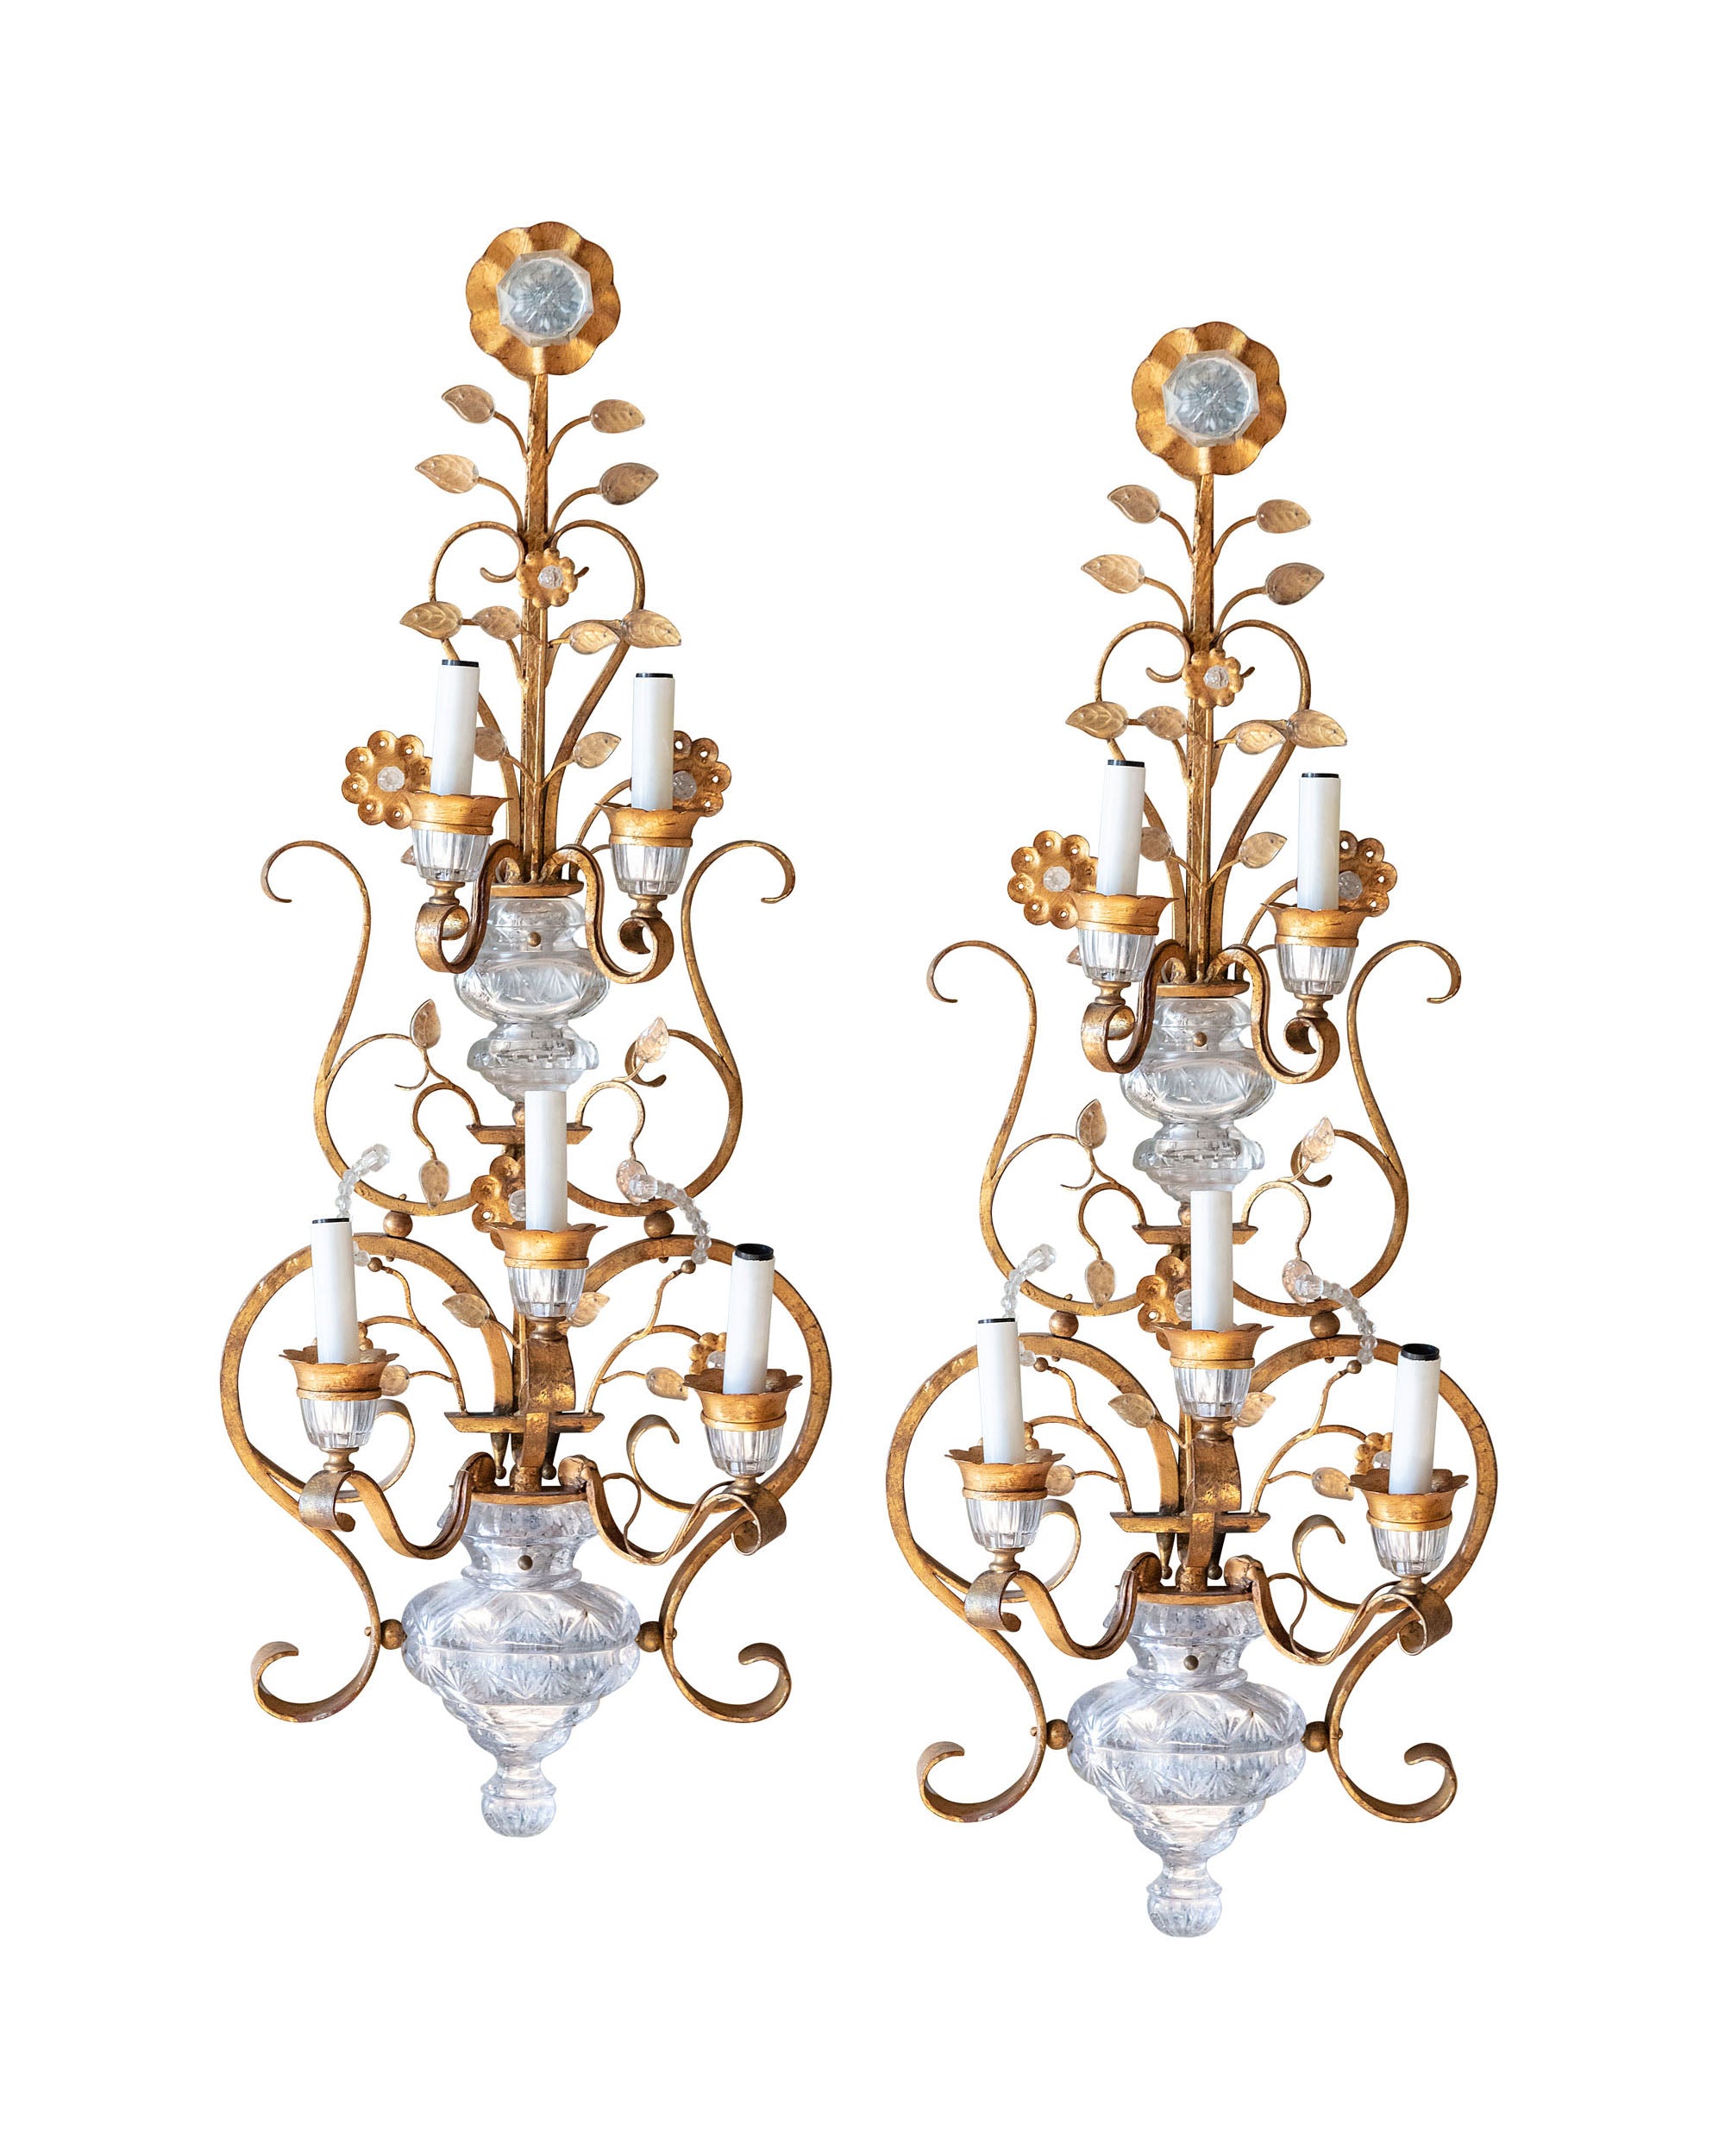 Pair of golden metal wall lights with crystals and five light holders